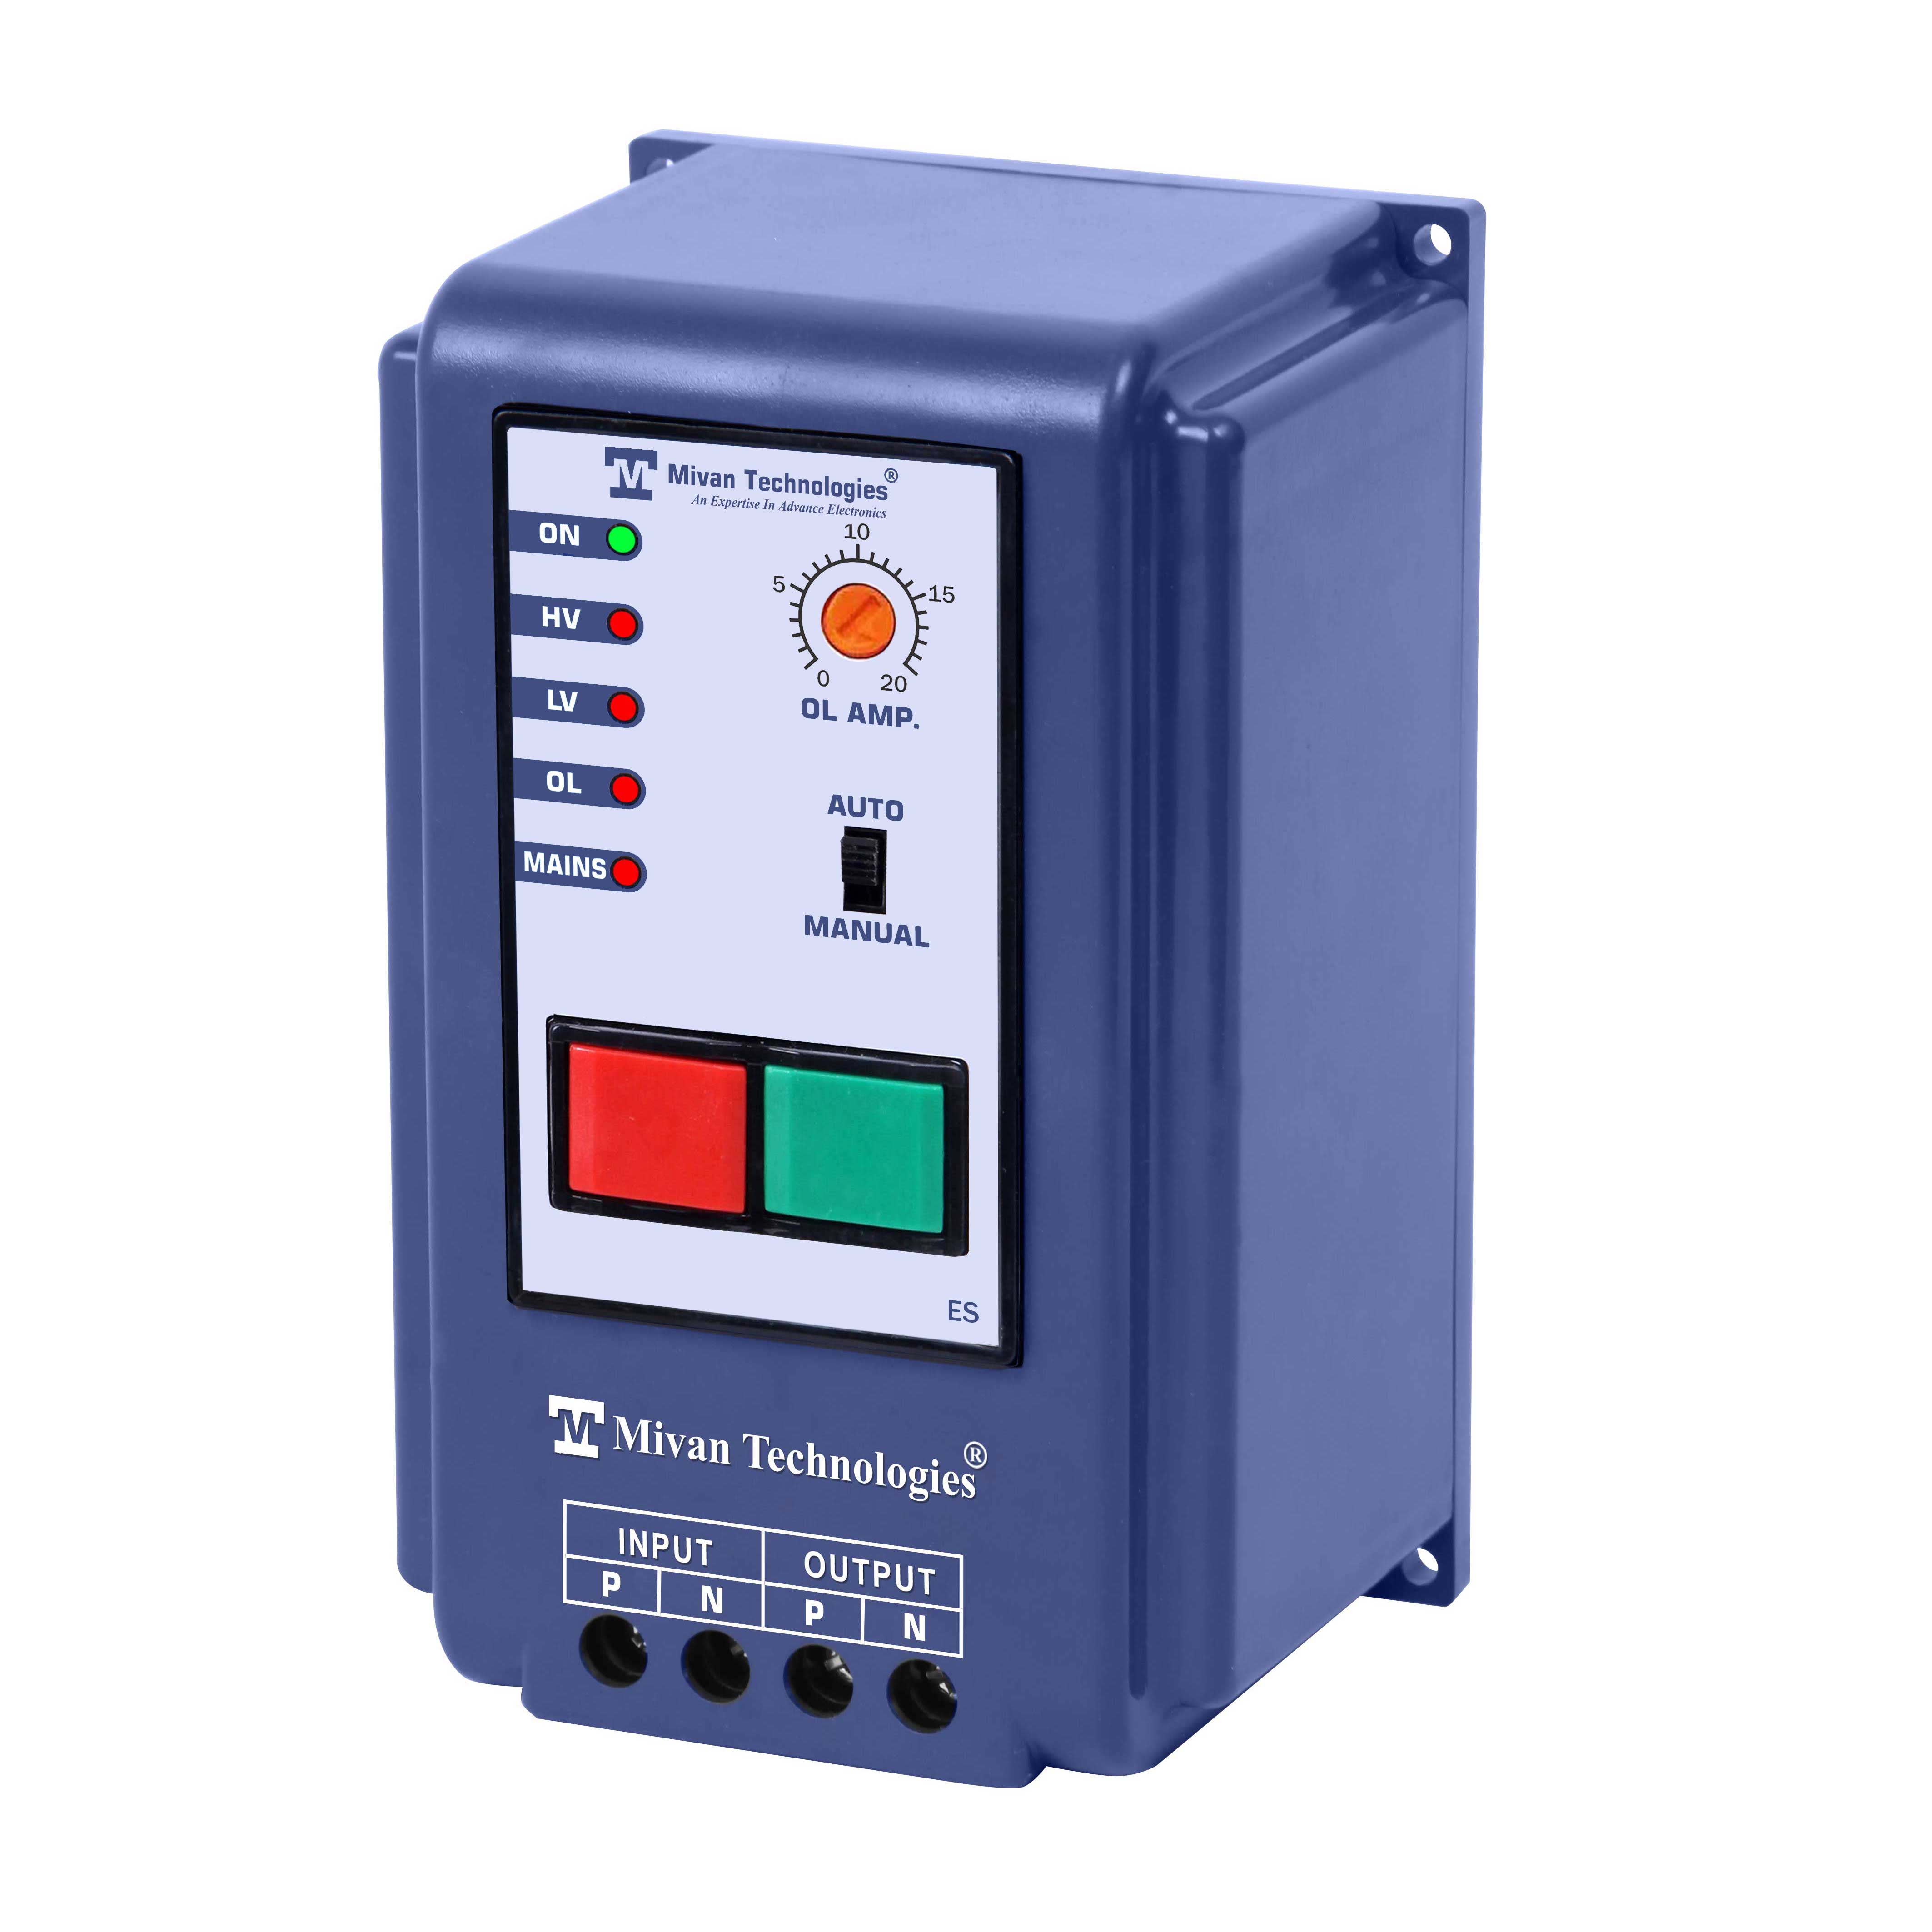 Single Phase motor starter  with high low voltage and overload protection suitable for all single phase appliances Suitable up to 3 hp motor  ES